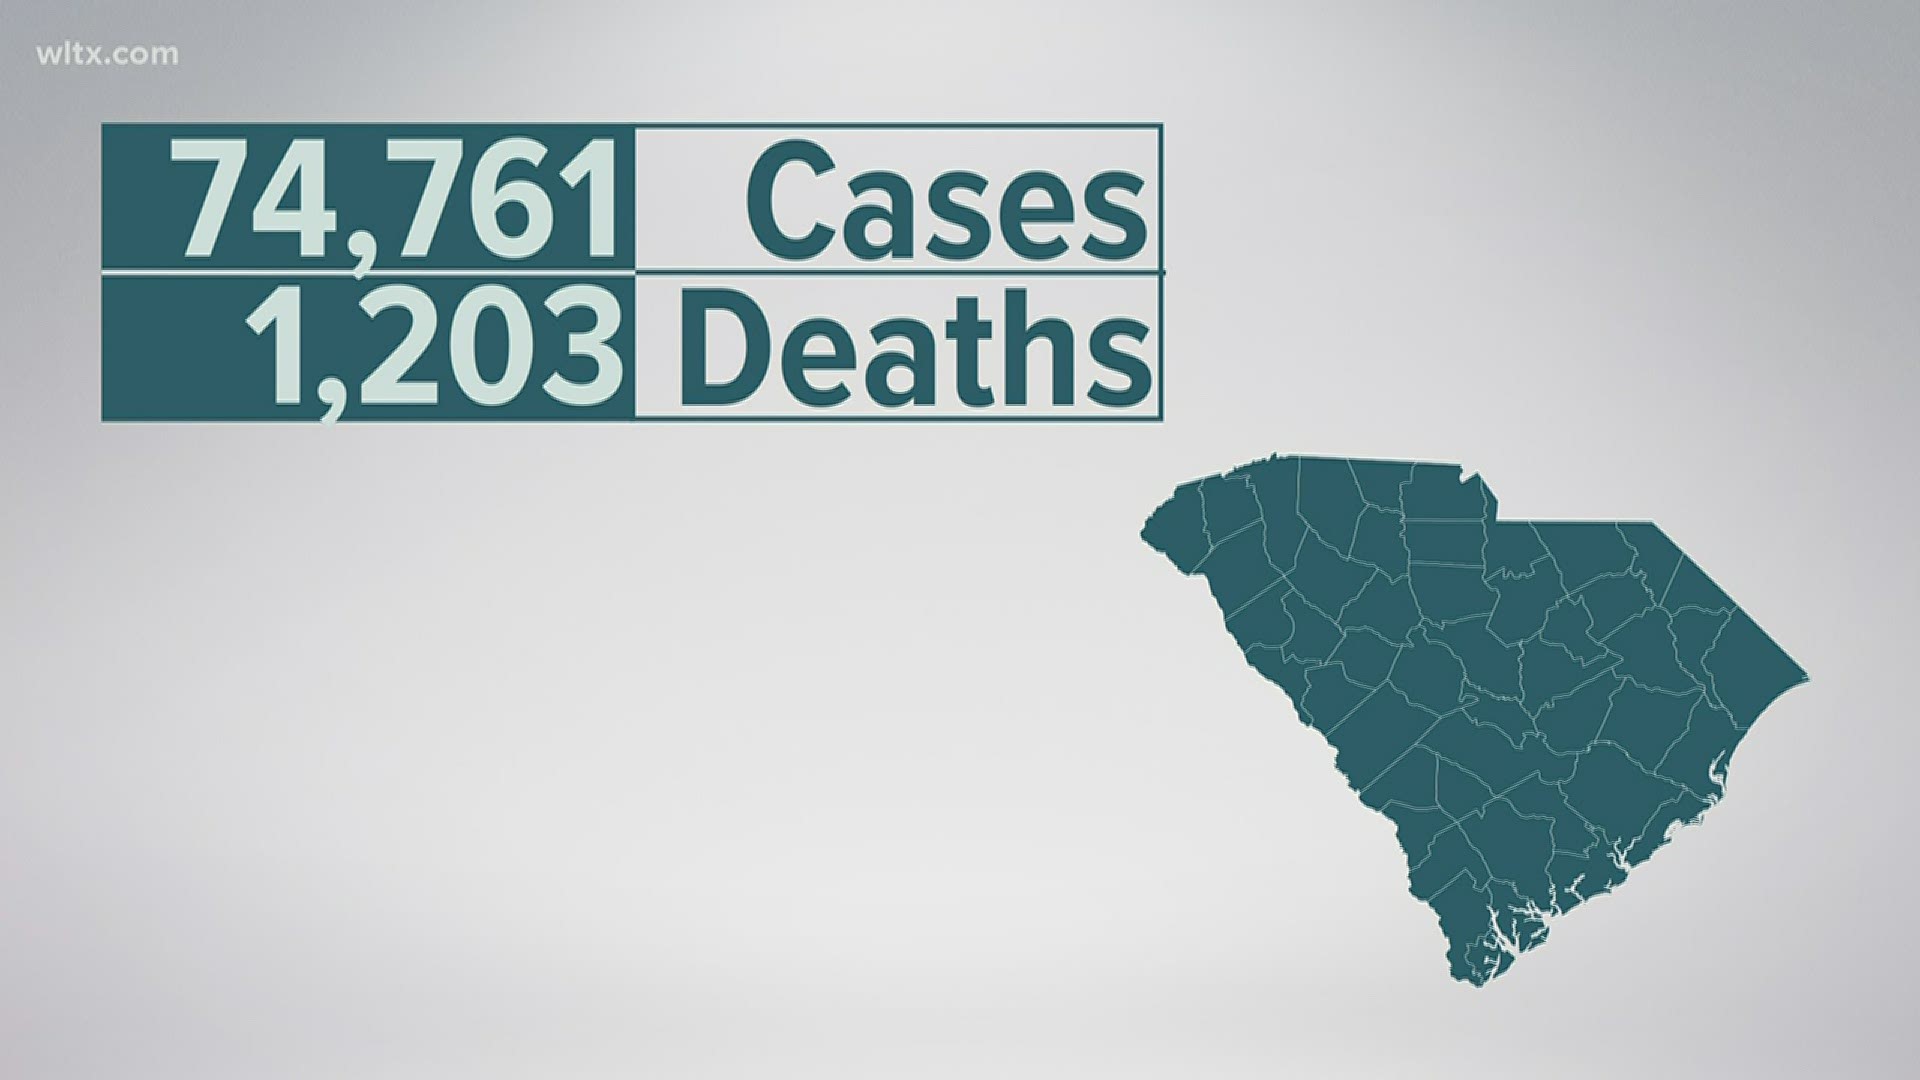 This brings the total number of confirmed cases to 74,761, probable cases to 281, confirmed deaths to 1,203, and 25 probable deaths.